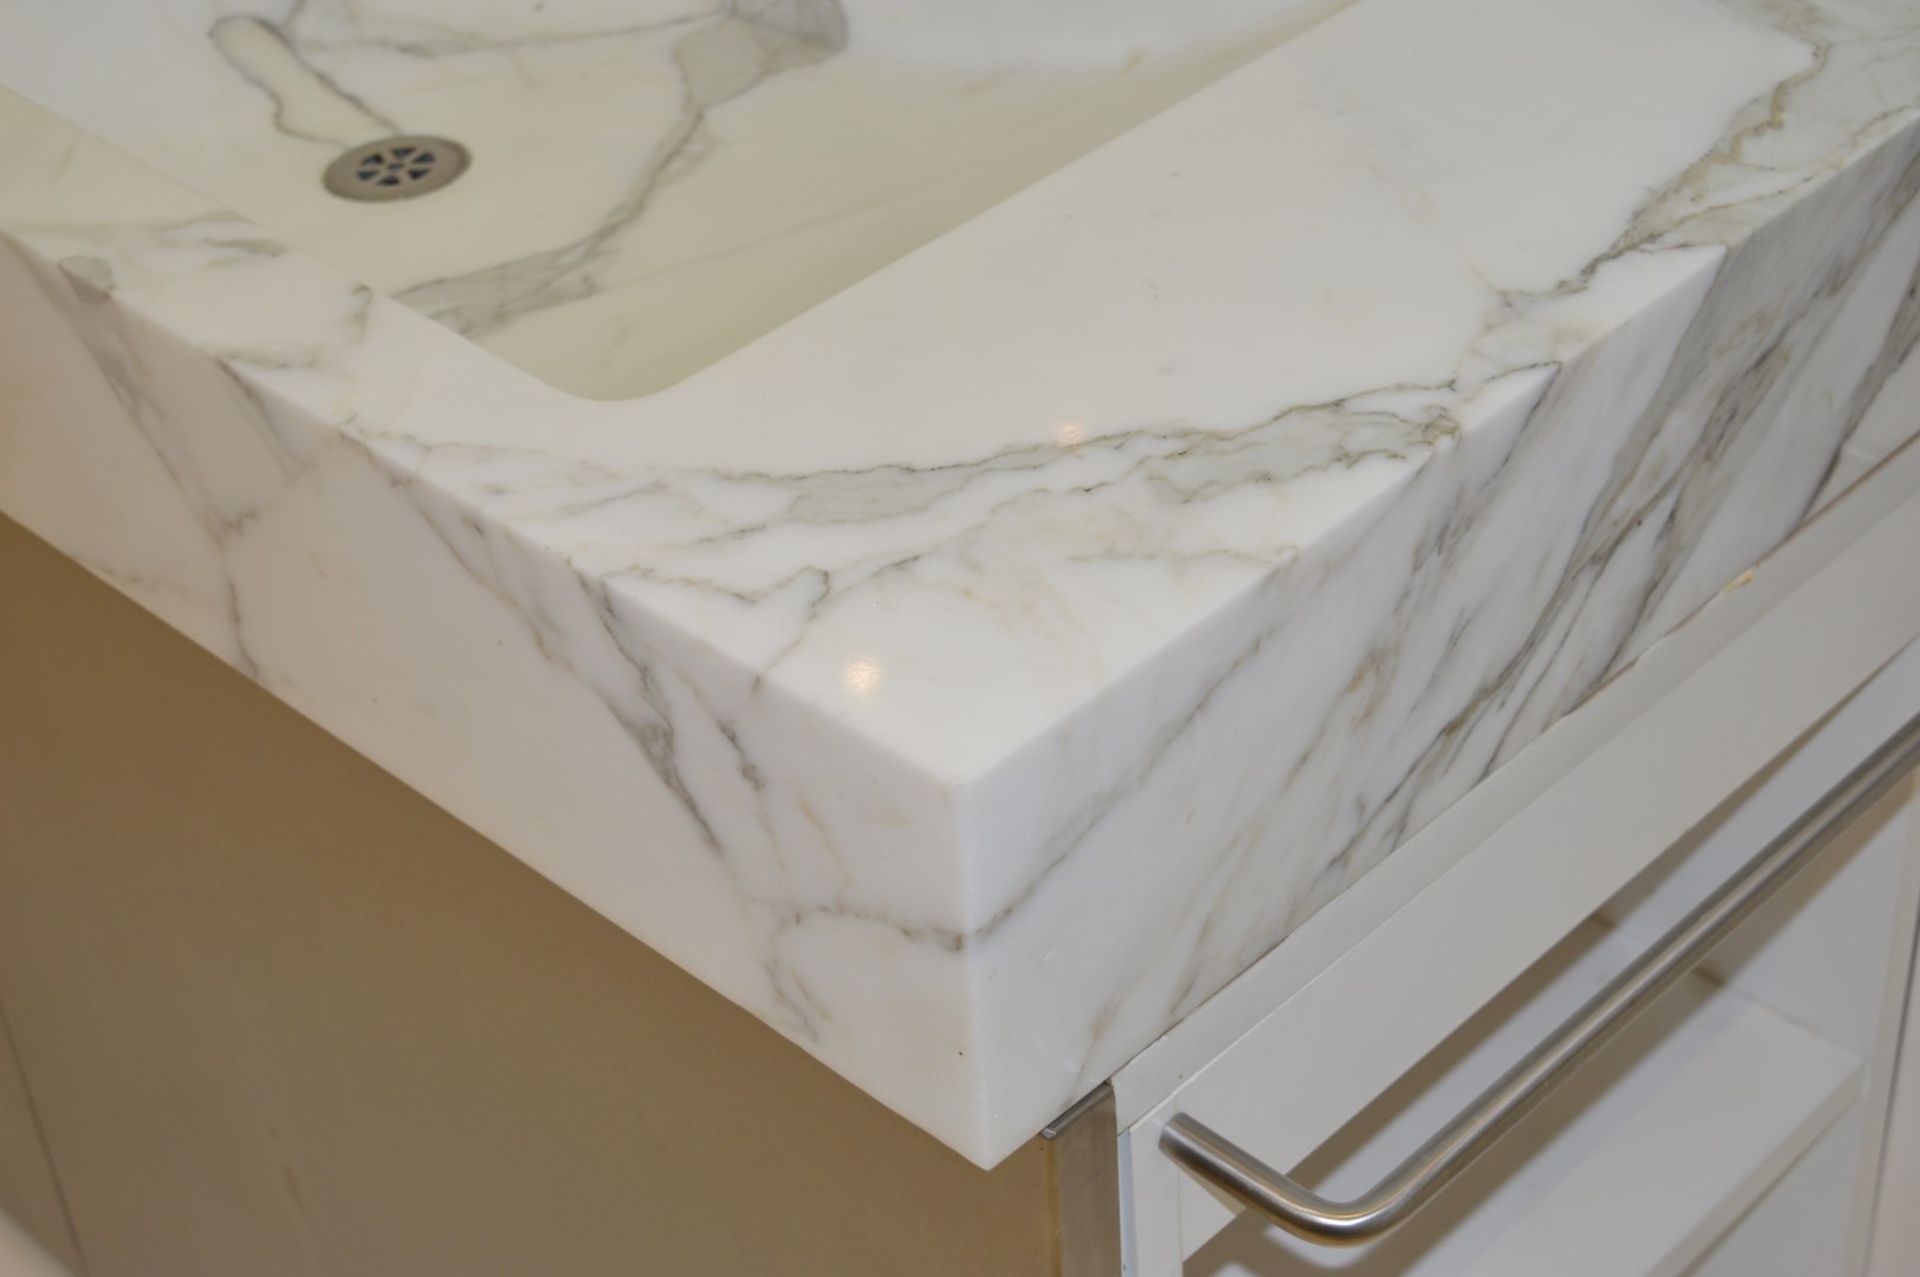 1 x Bespoke His & Hers Marble Bathroom Vanity Unit - Exquisite 7ft Twin Marble Sink Basin With Two - Image 6 of 25